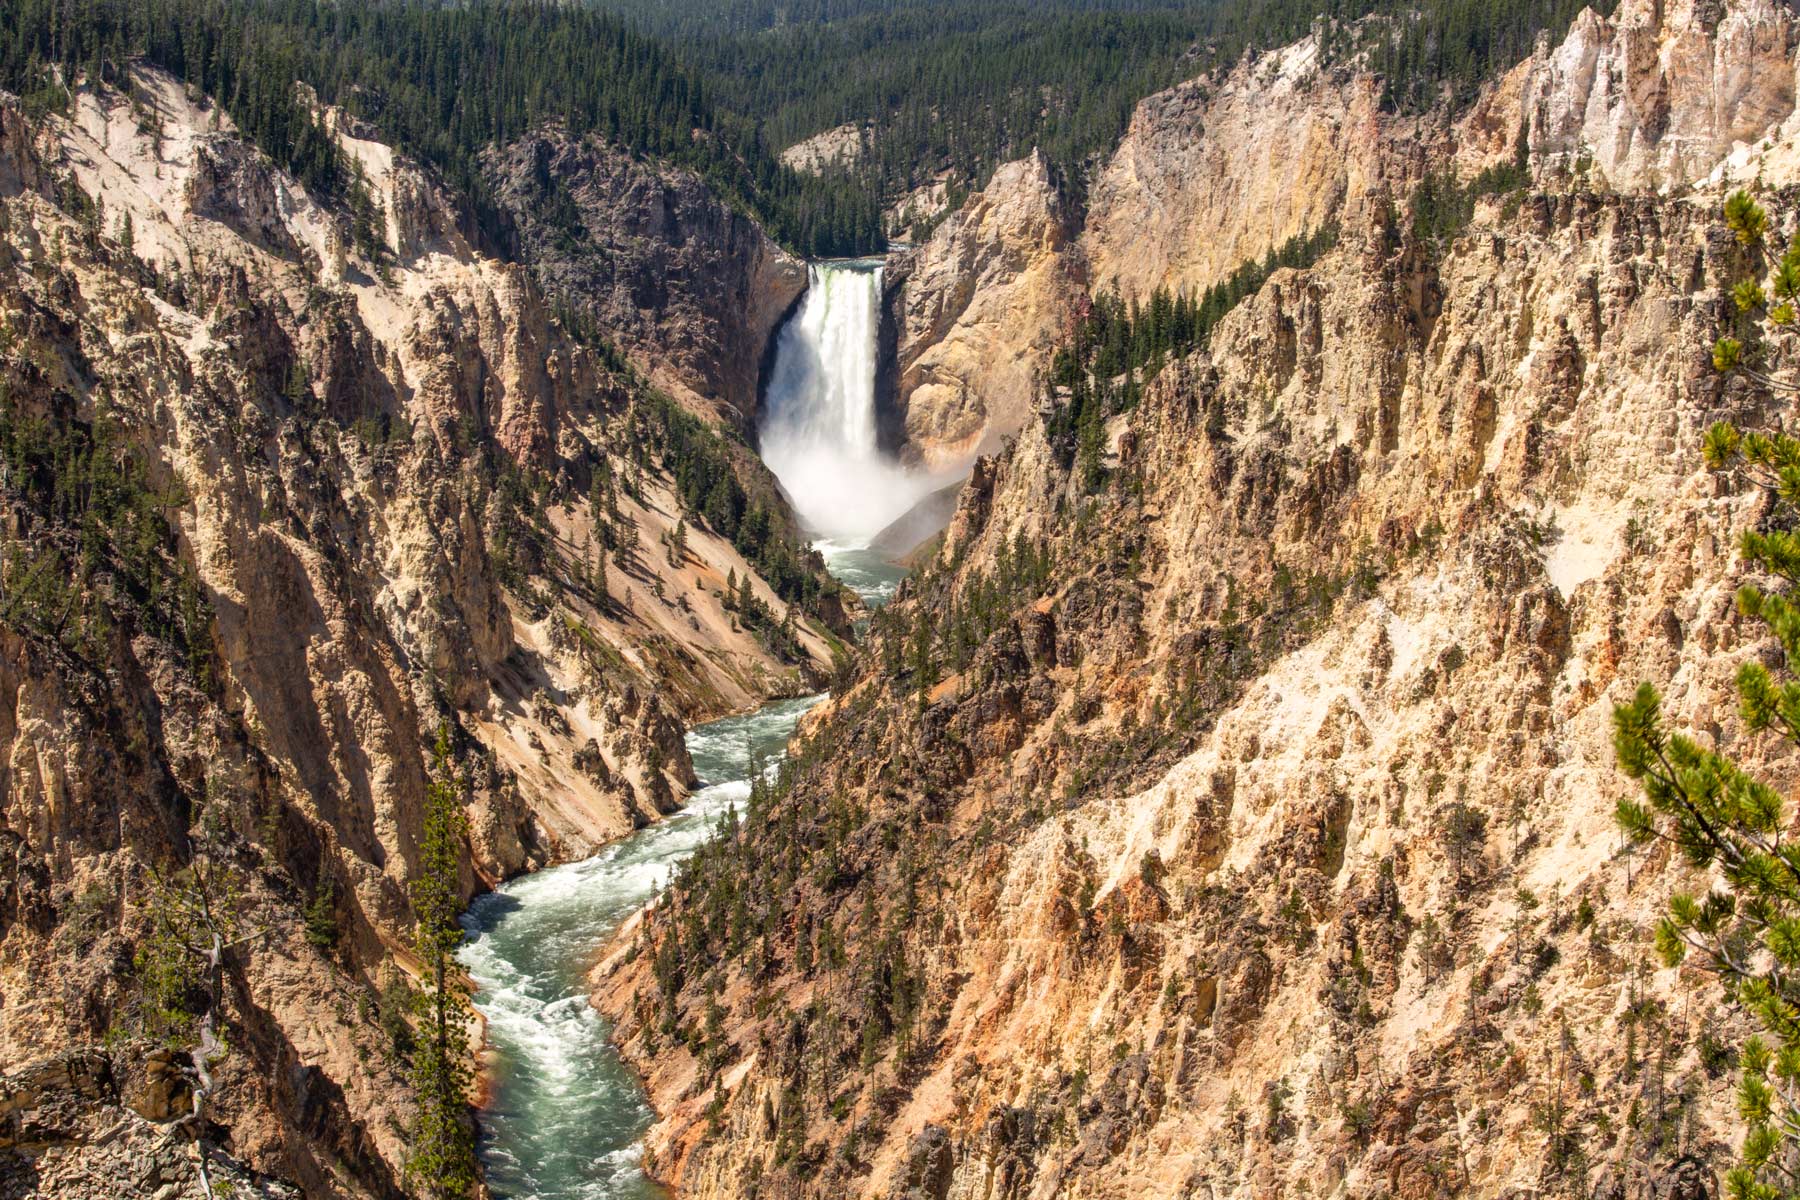 10+ (FASCINATING) Yellowstone National Park Facts You Probably Didn’t Realize